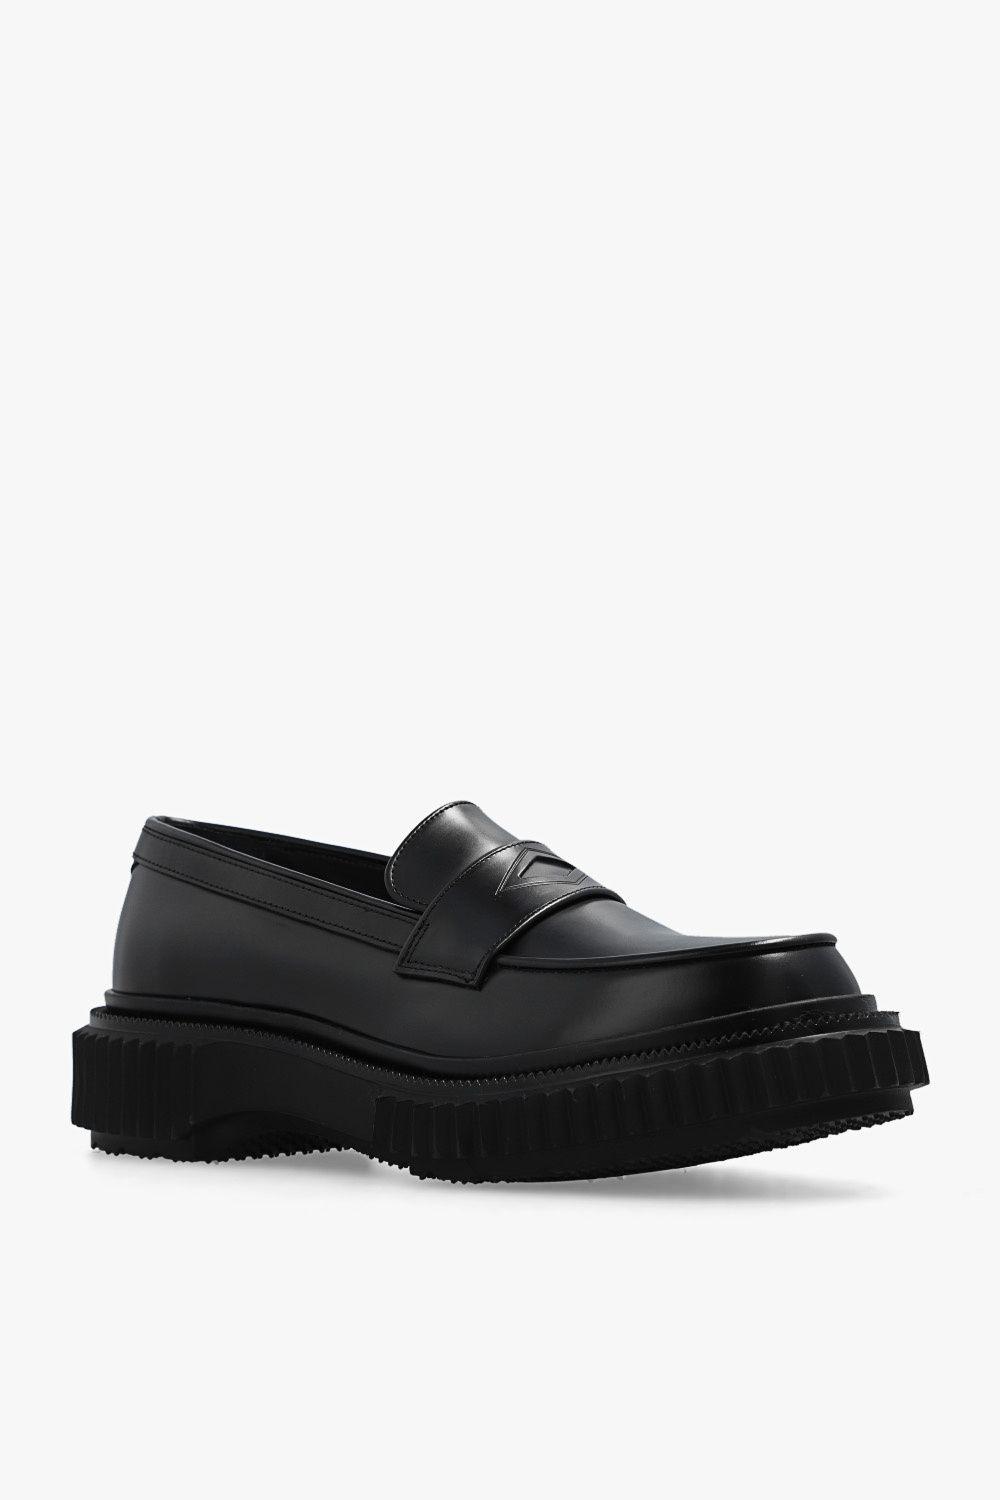 Adieu 'type 182' Leather Loafers in Black | Lyst